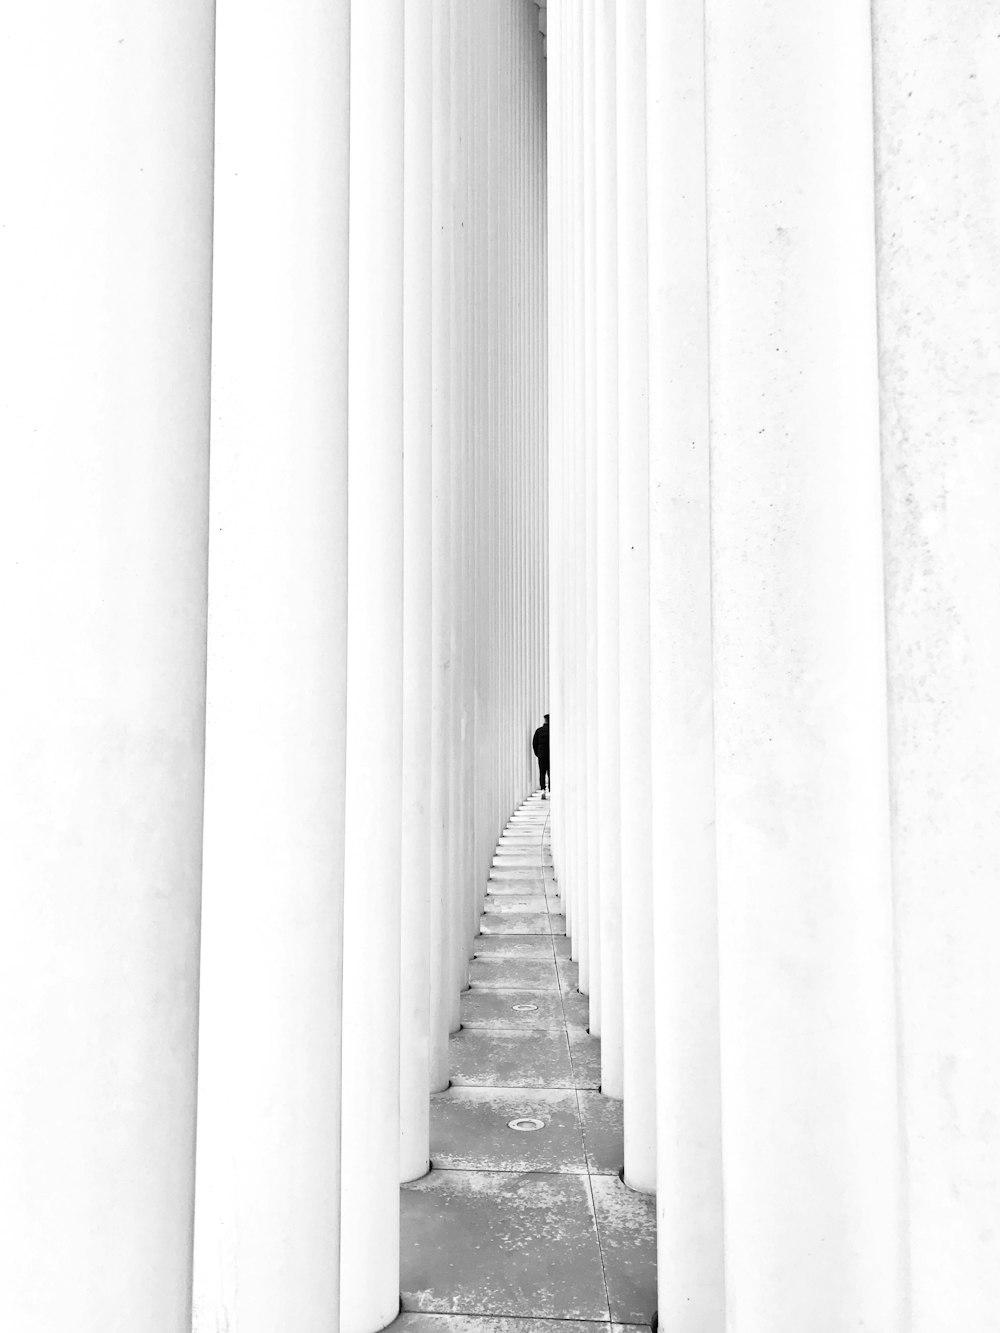 a person standing between two rows of white pillars